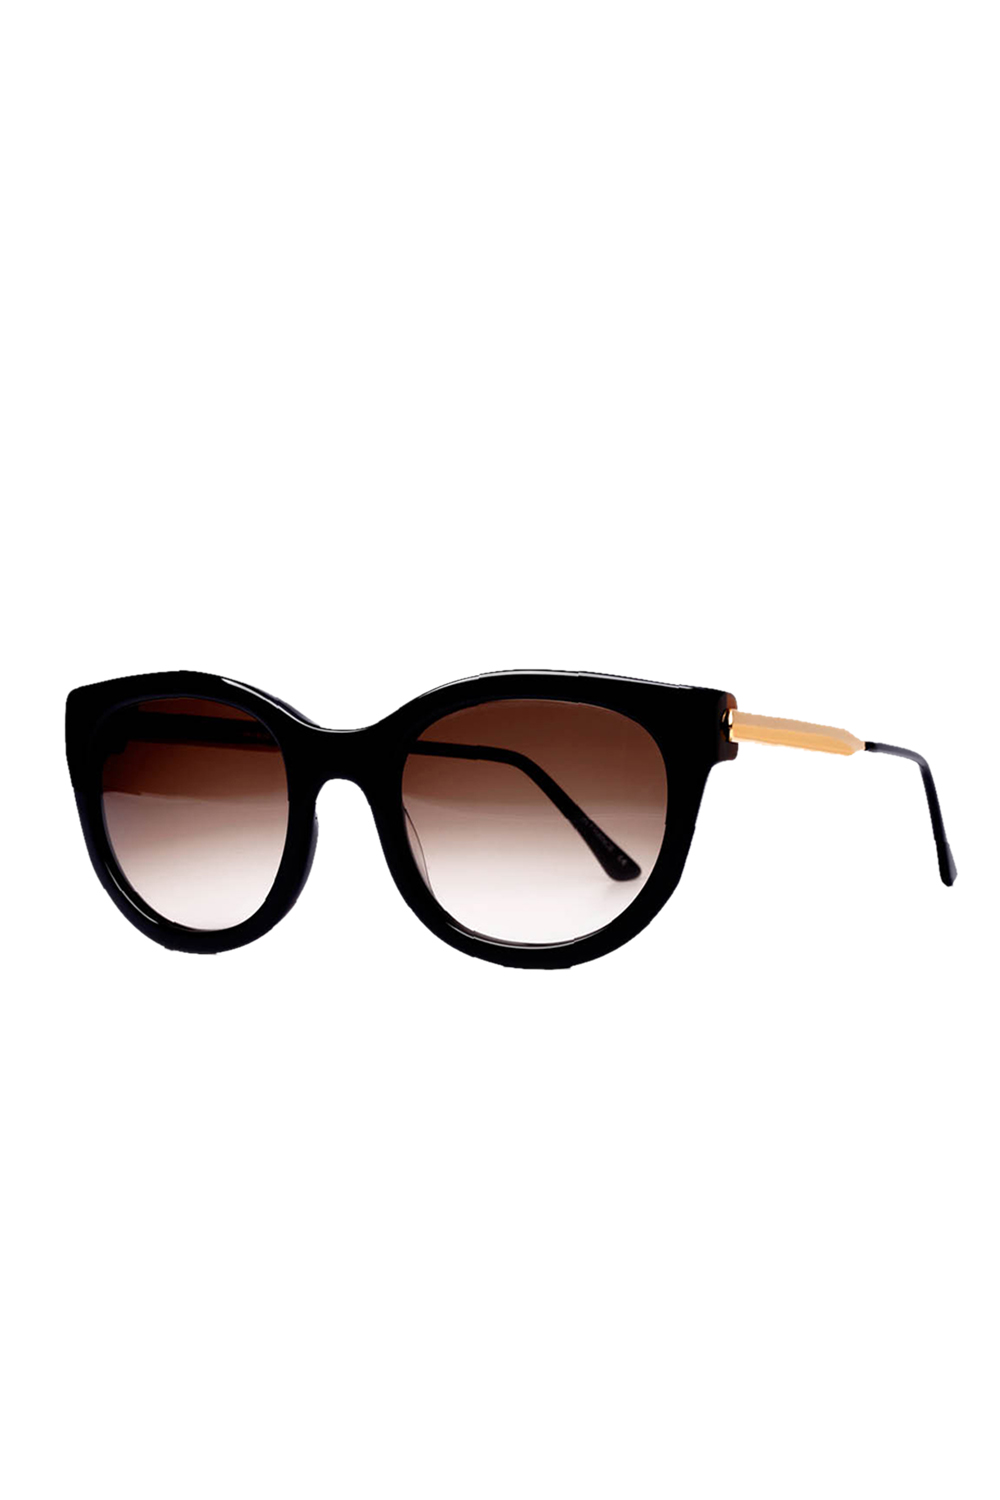 Thierry Lasry sunglasses, $695, from Sunglass Bar.